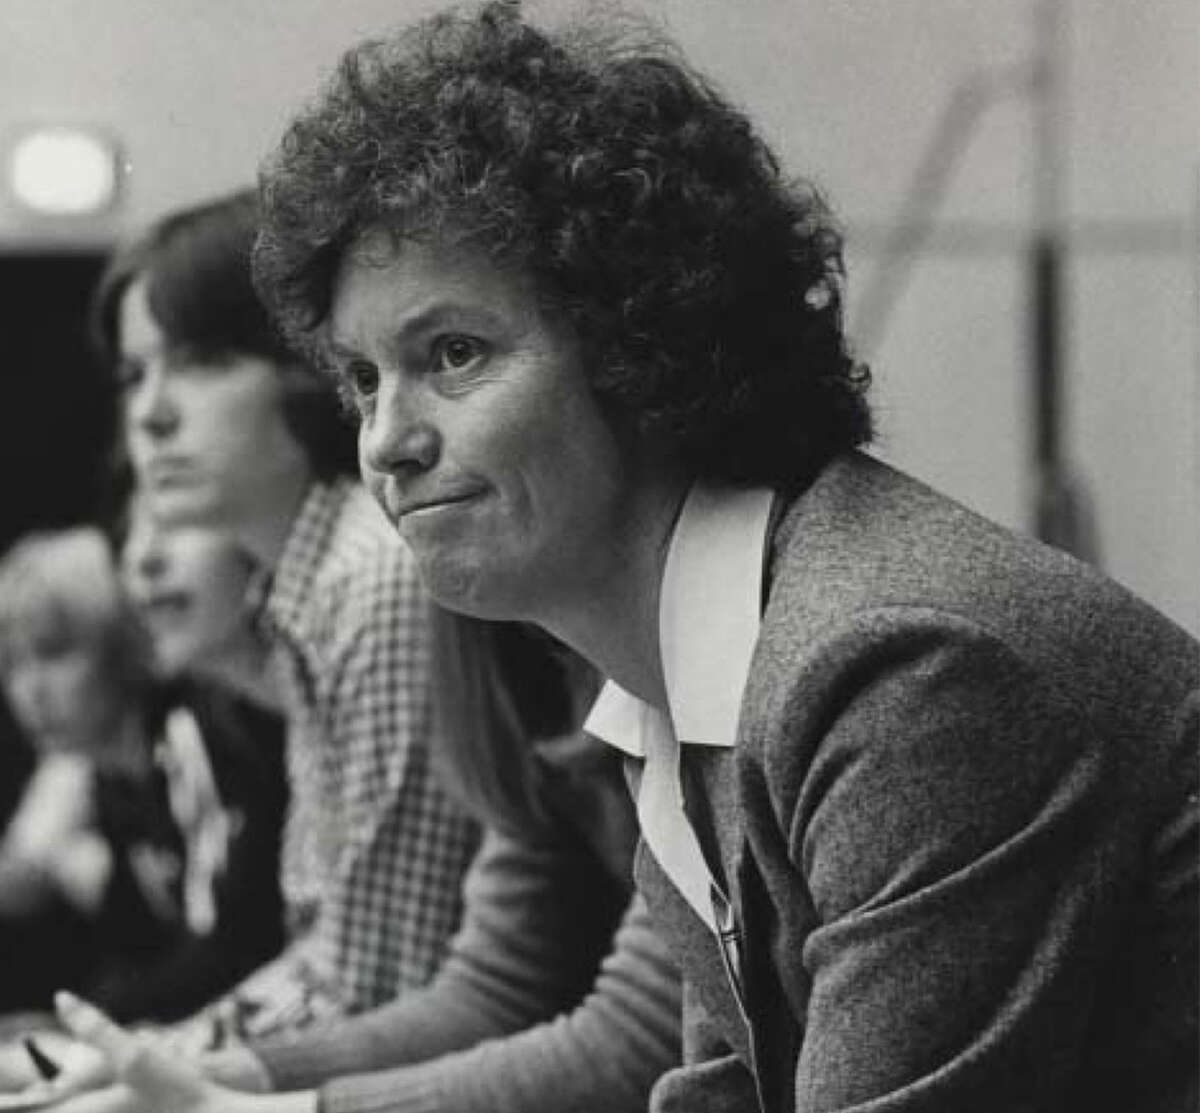 Louise O'Neal, pictured here coaching Yale women's basketball, was a pioneer in the sport, gaining national recognition to the sport in her time with both Yale and Southern Connecticut.